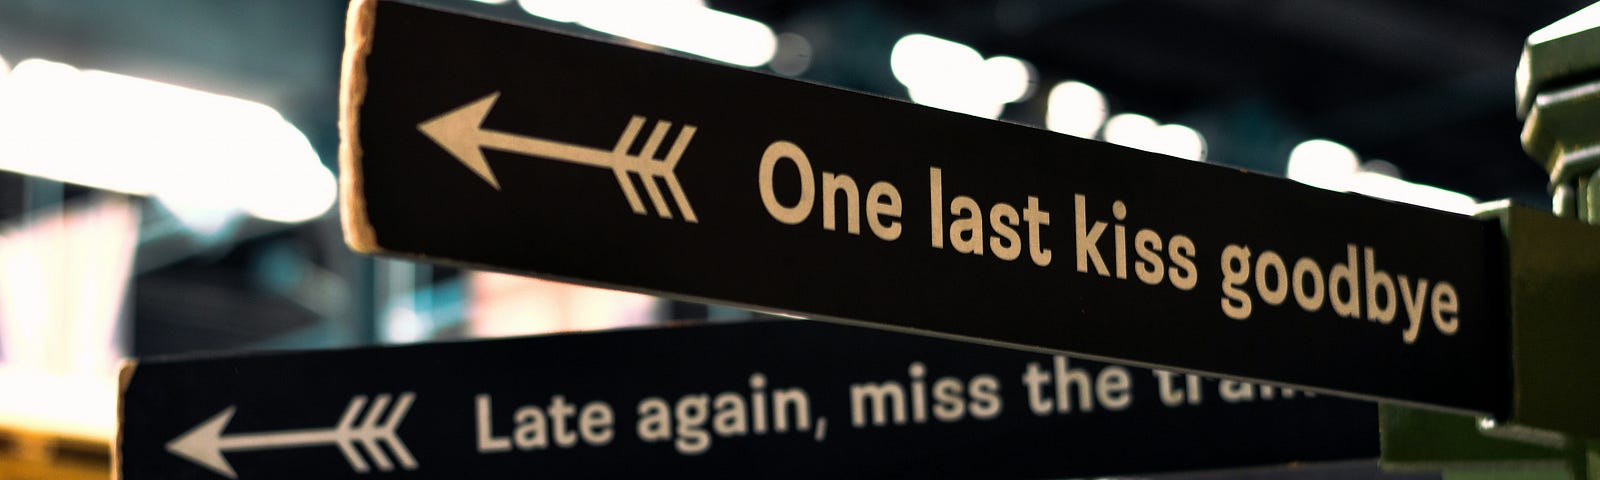 A sign at the train station that points to the left and says, “One last kiss goodbye.”